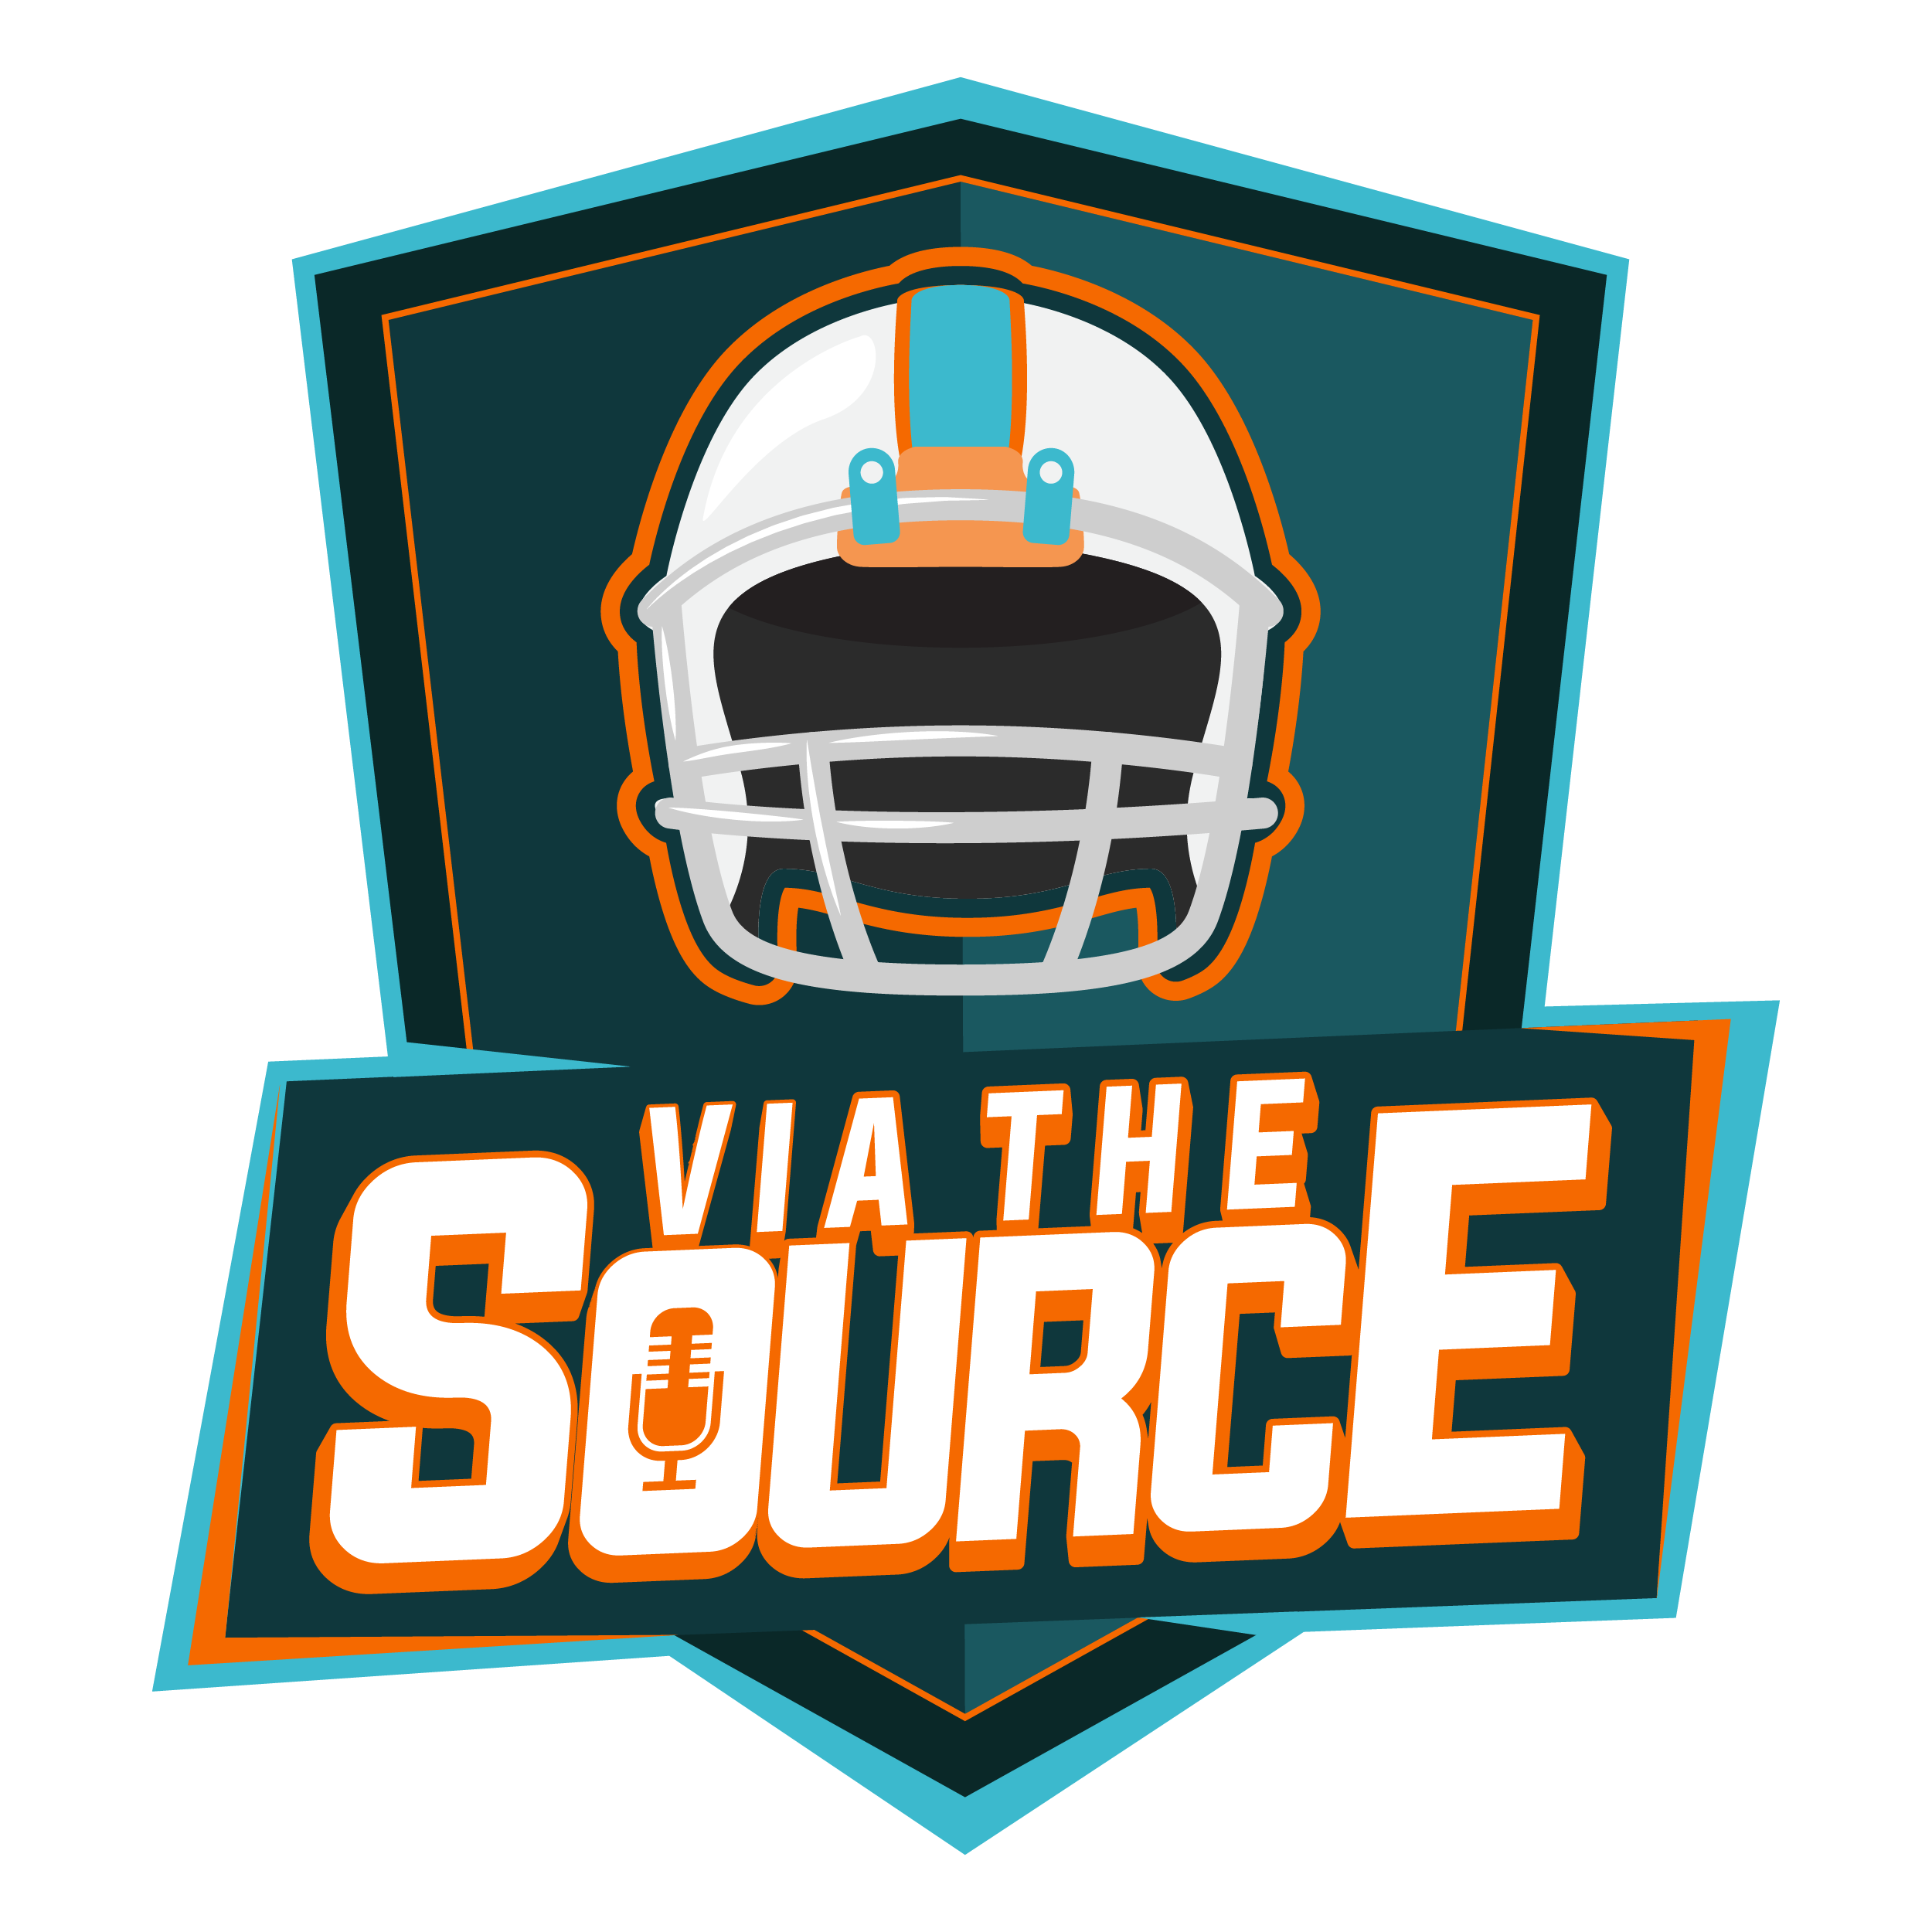 Episode 1 - Introduction, Browns make moves, thoughts on Landry, Tannehill rumors